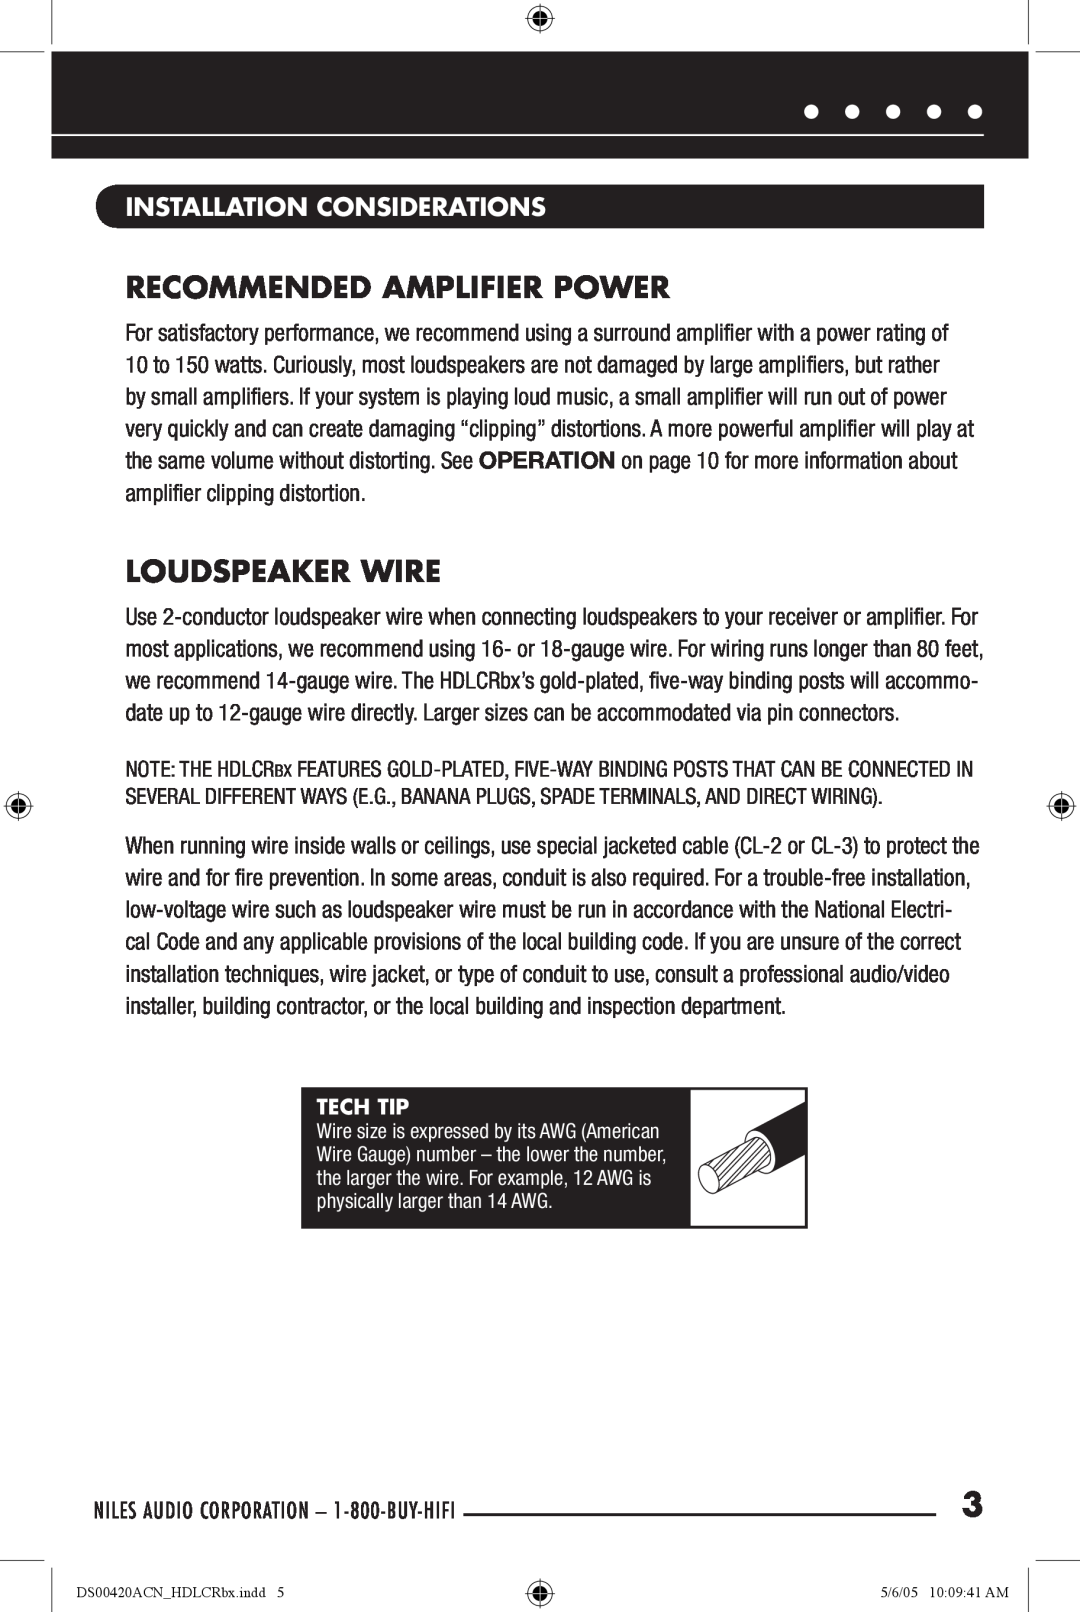 Niles Audio DS00420ACN manual Recommended Amplifier Power, Loudspeaker Wire, Installation Considerations, Tech Tip 